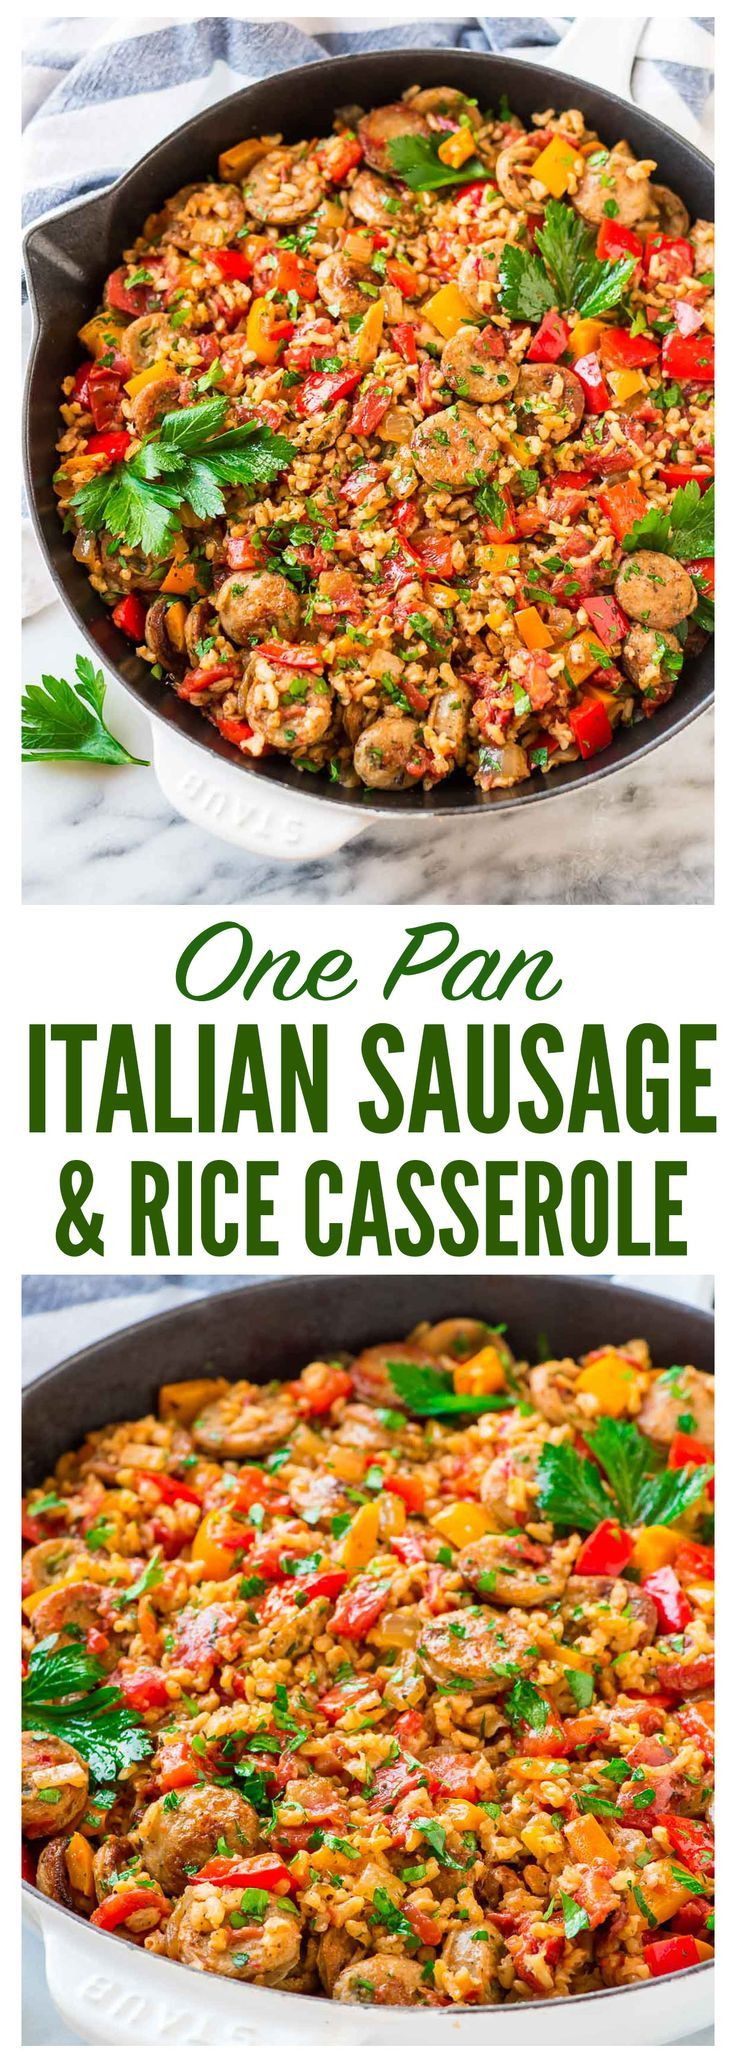 Recipes With Italian Sausage And Rice
 Quick and easy Italian Sausage and Rice Casserole Cooks